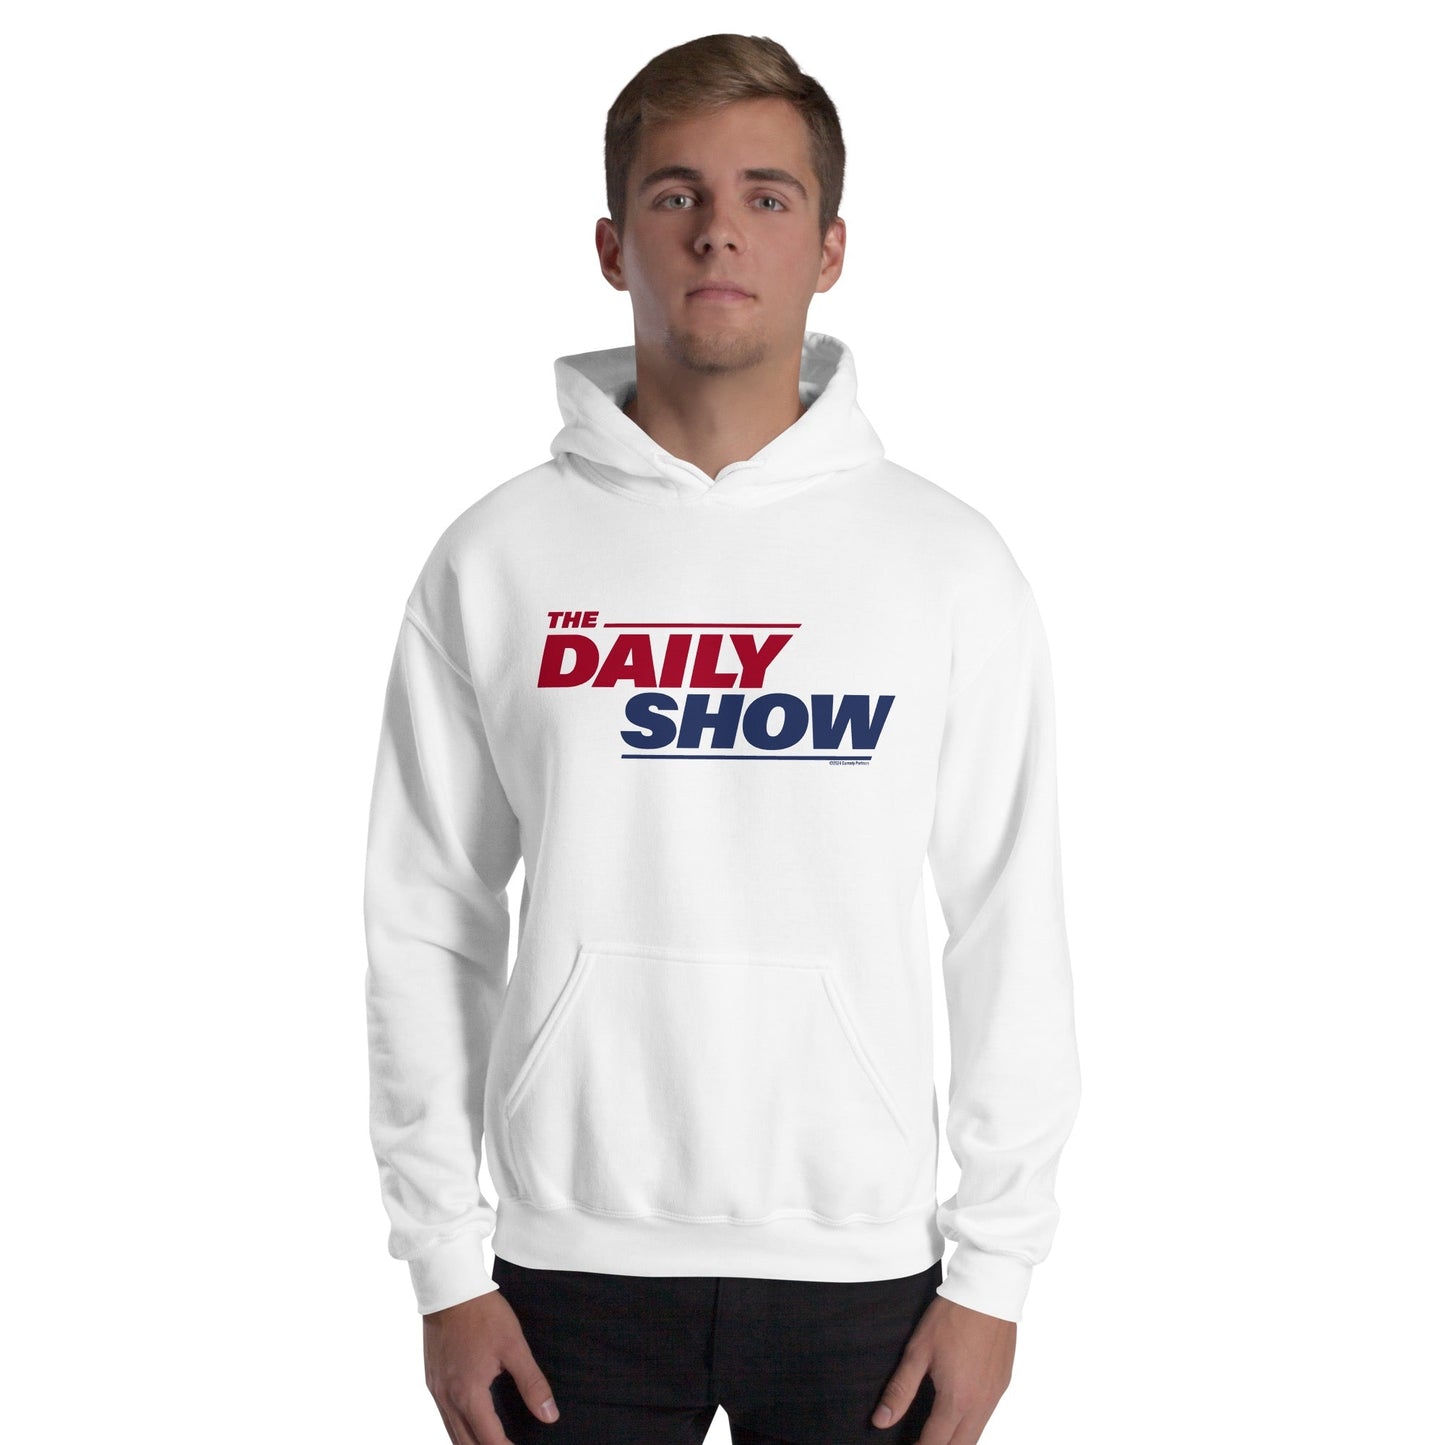 The Daily Show Logo Unisex Hoodie - Paramount Shop